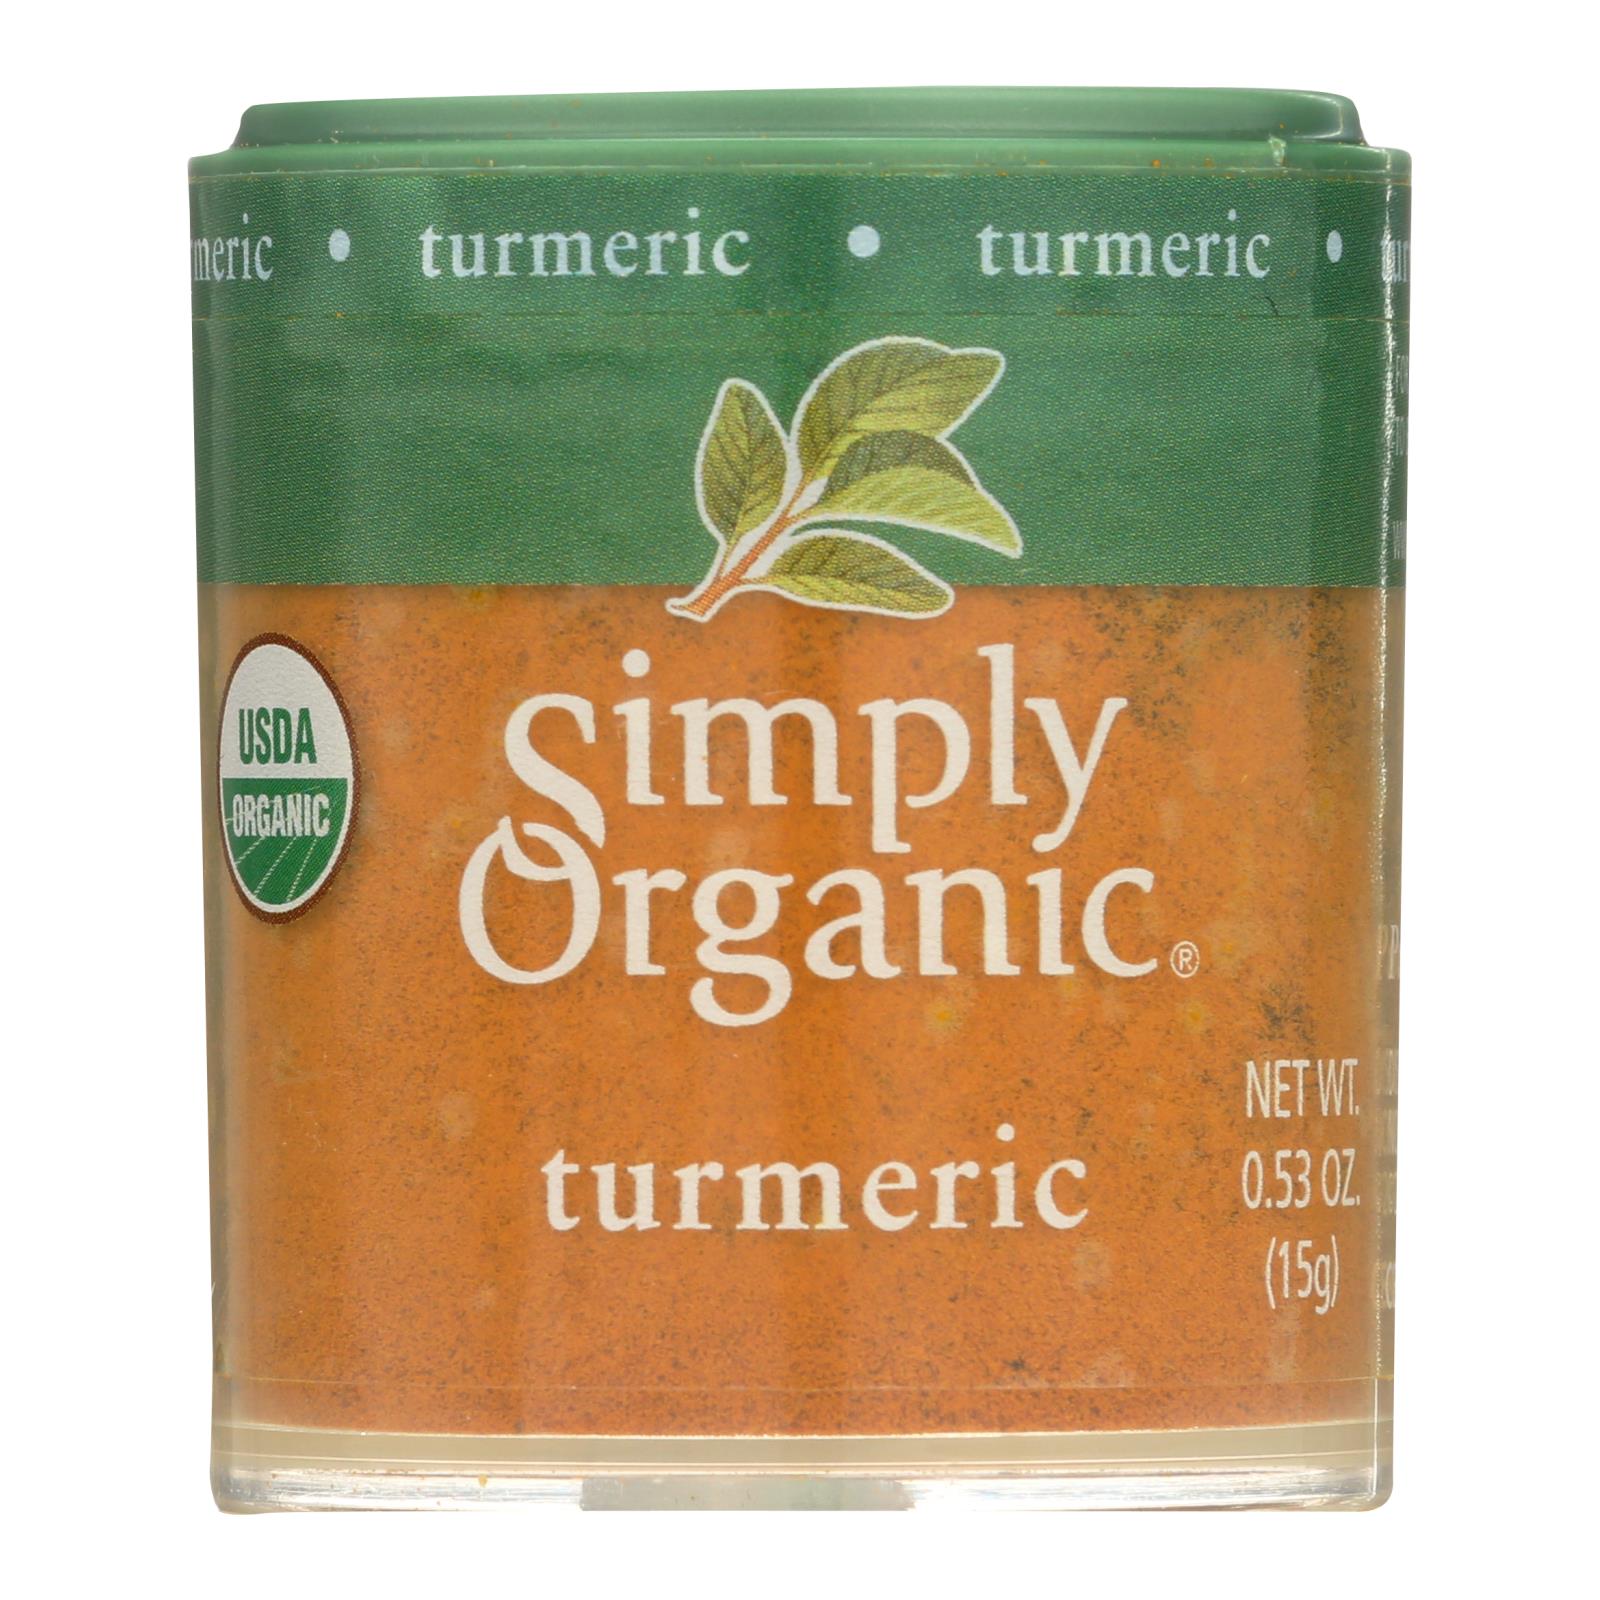 Simply Organic Turmeric Root - Organic - Ground - .53 Oz - Case Of 6 - Whole Green Foods